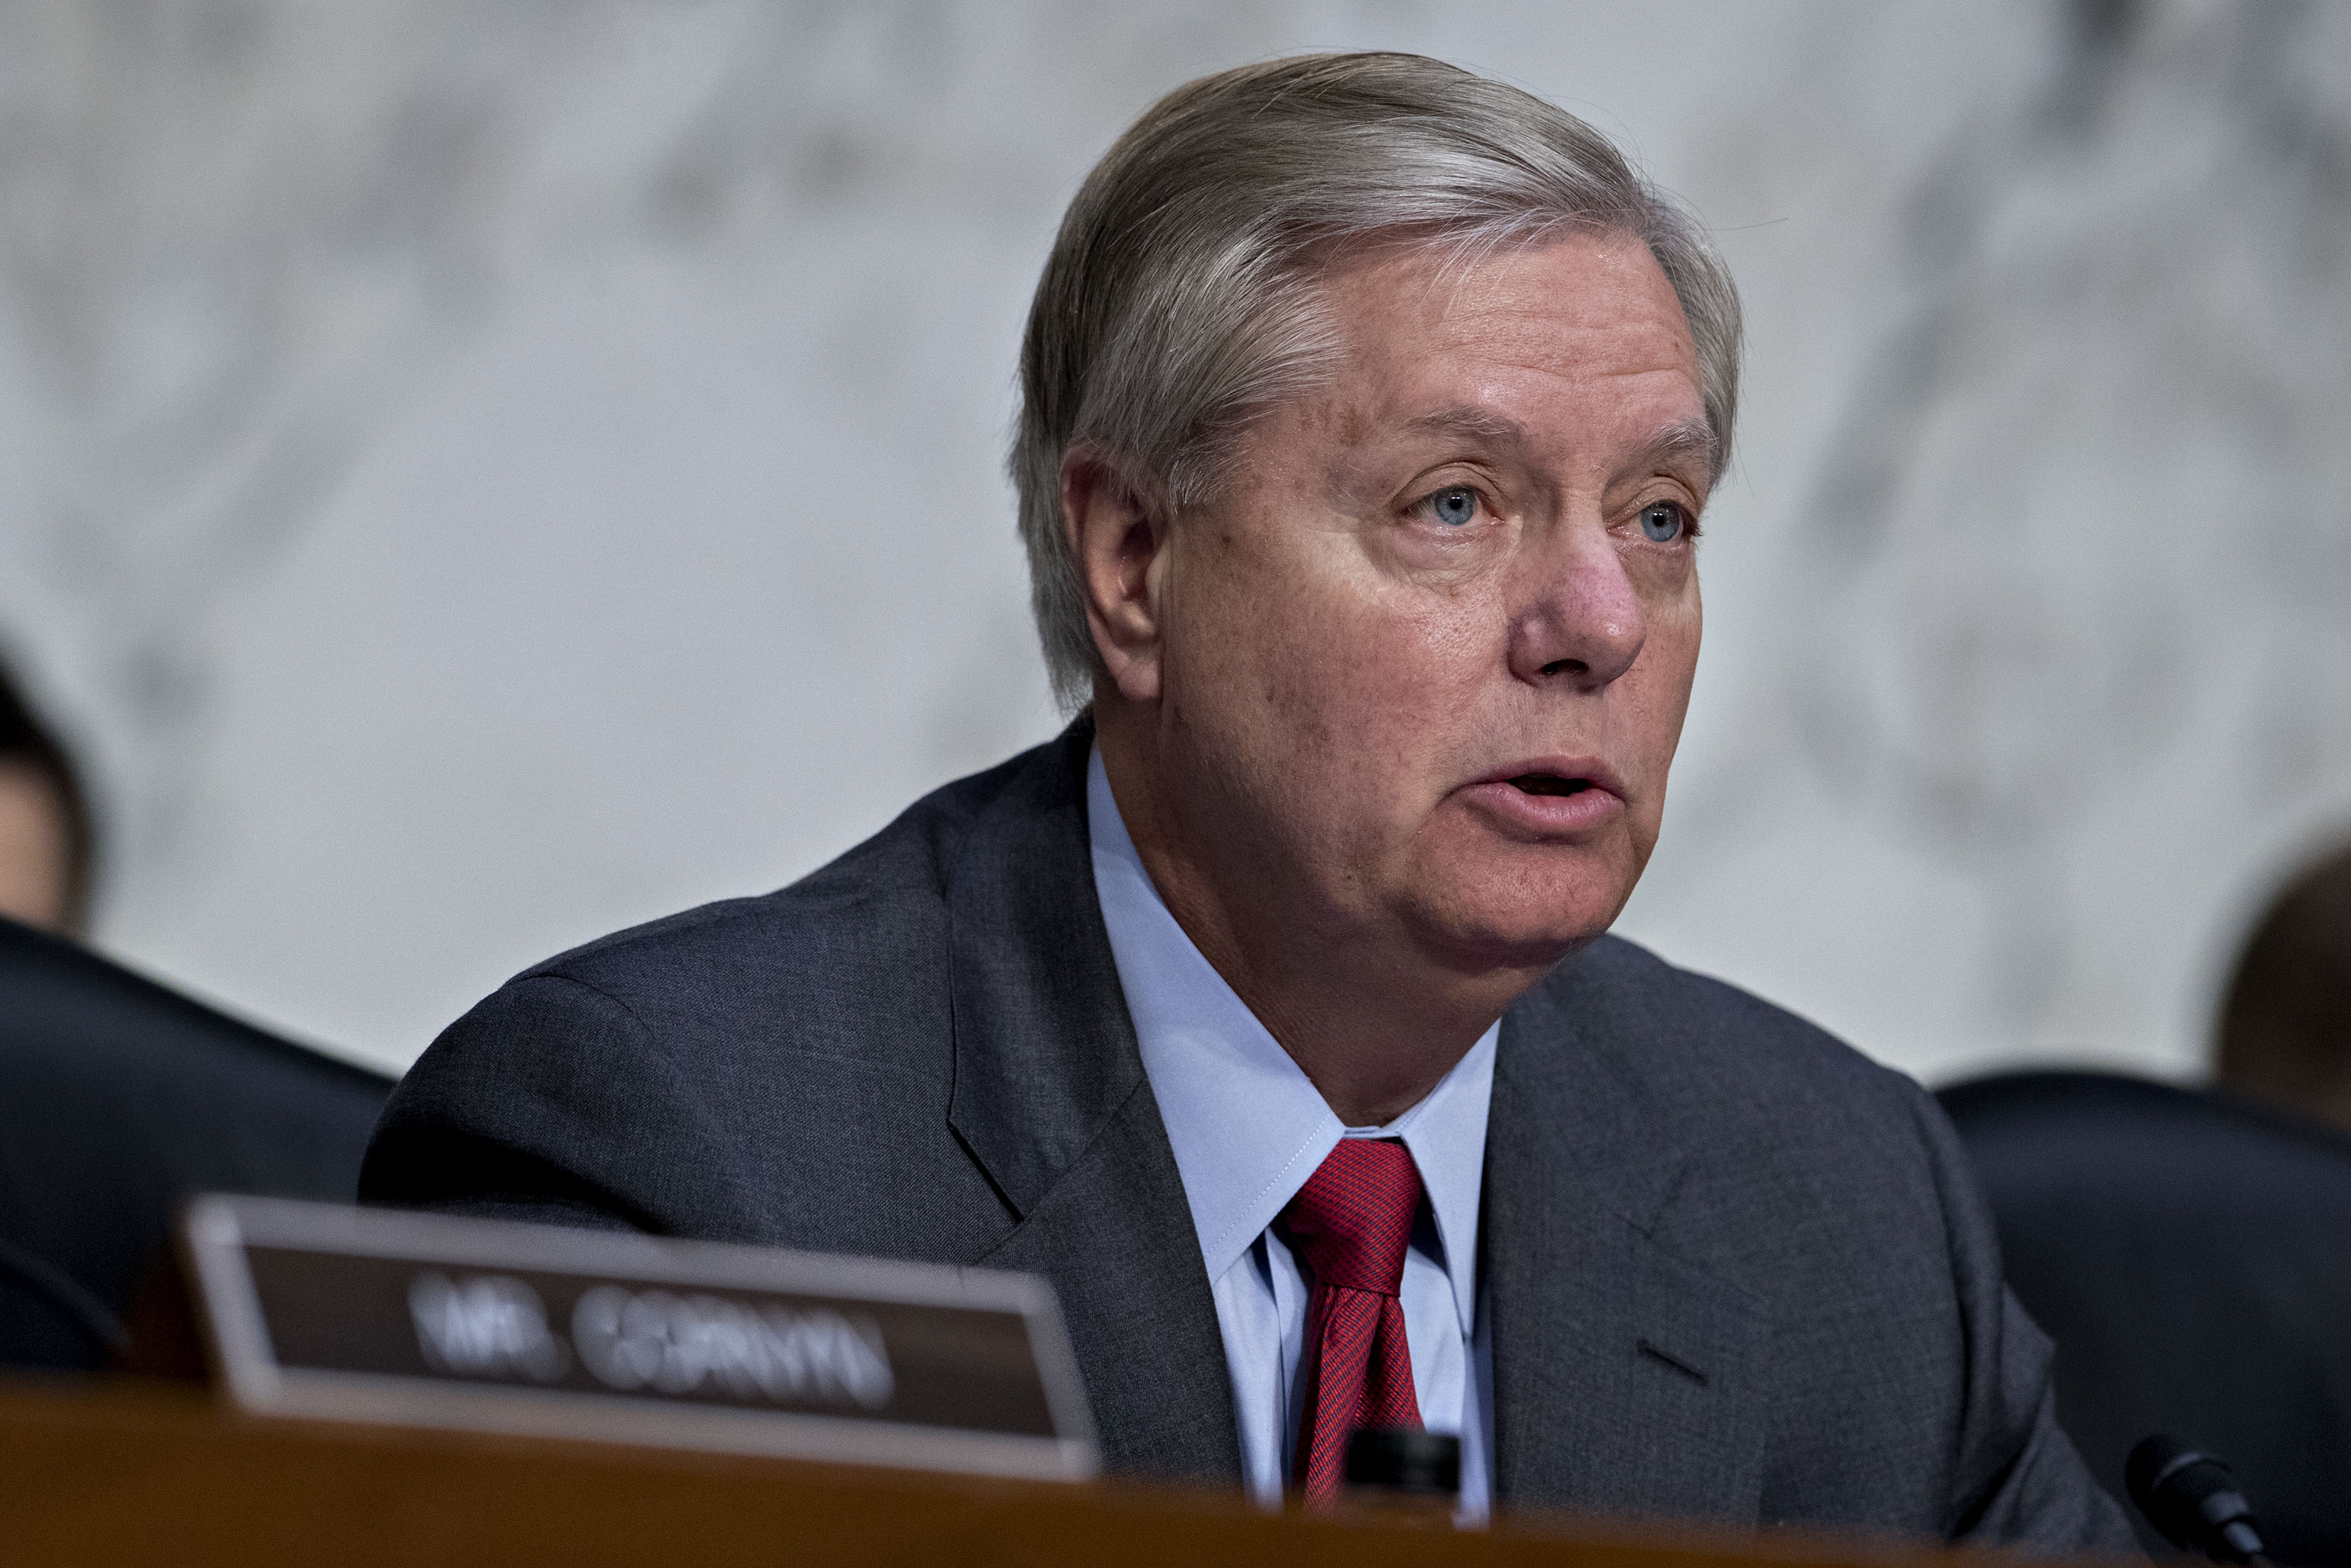 Senator Lindsey Graham, a Republican from South Carolina and chairman of the Senate Judiciary Subcommittee on Crime and Terrorism, makes an opening statement during a hearing with former Acting Attorney General Sally Yates in Washington, D.C., on May 8, 2017. (Andrew Harrer—Bloomberg/Getty Images)